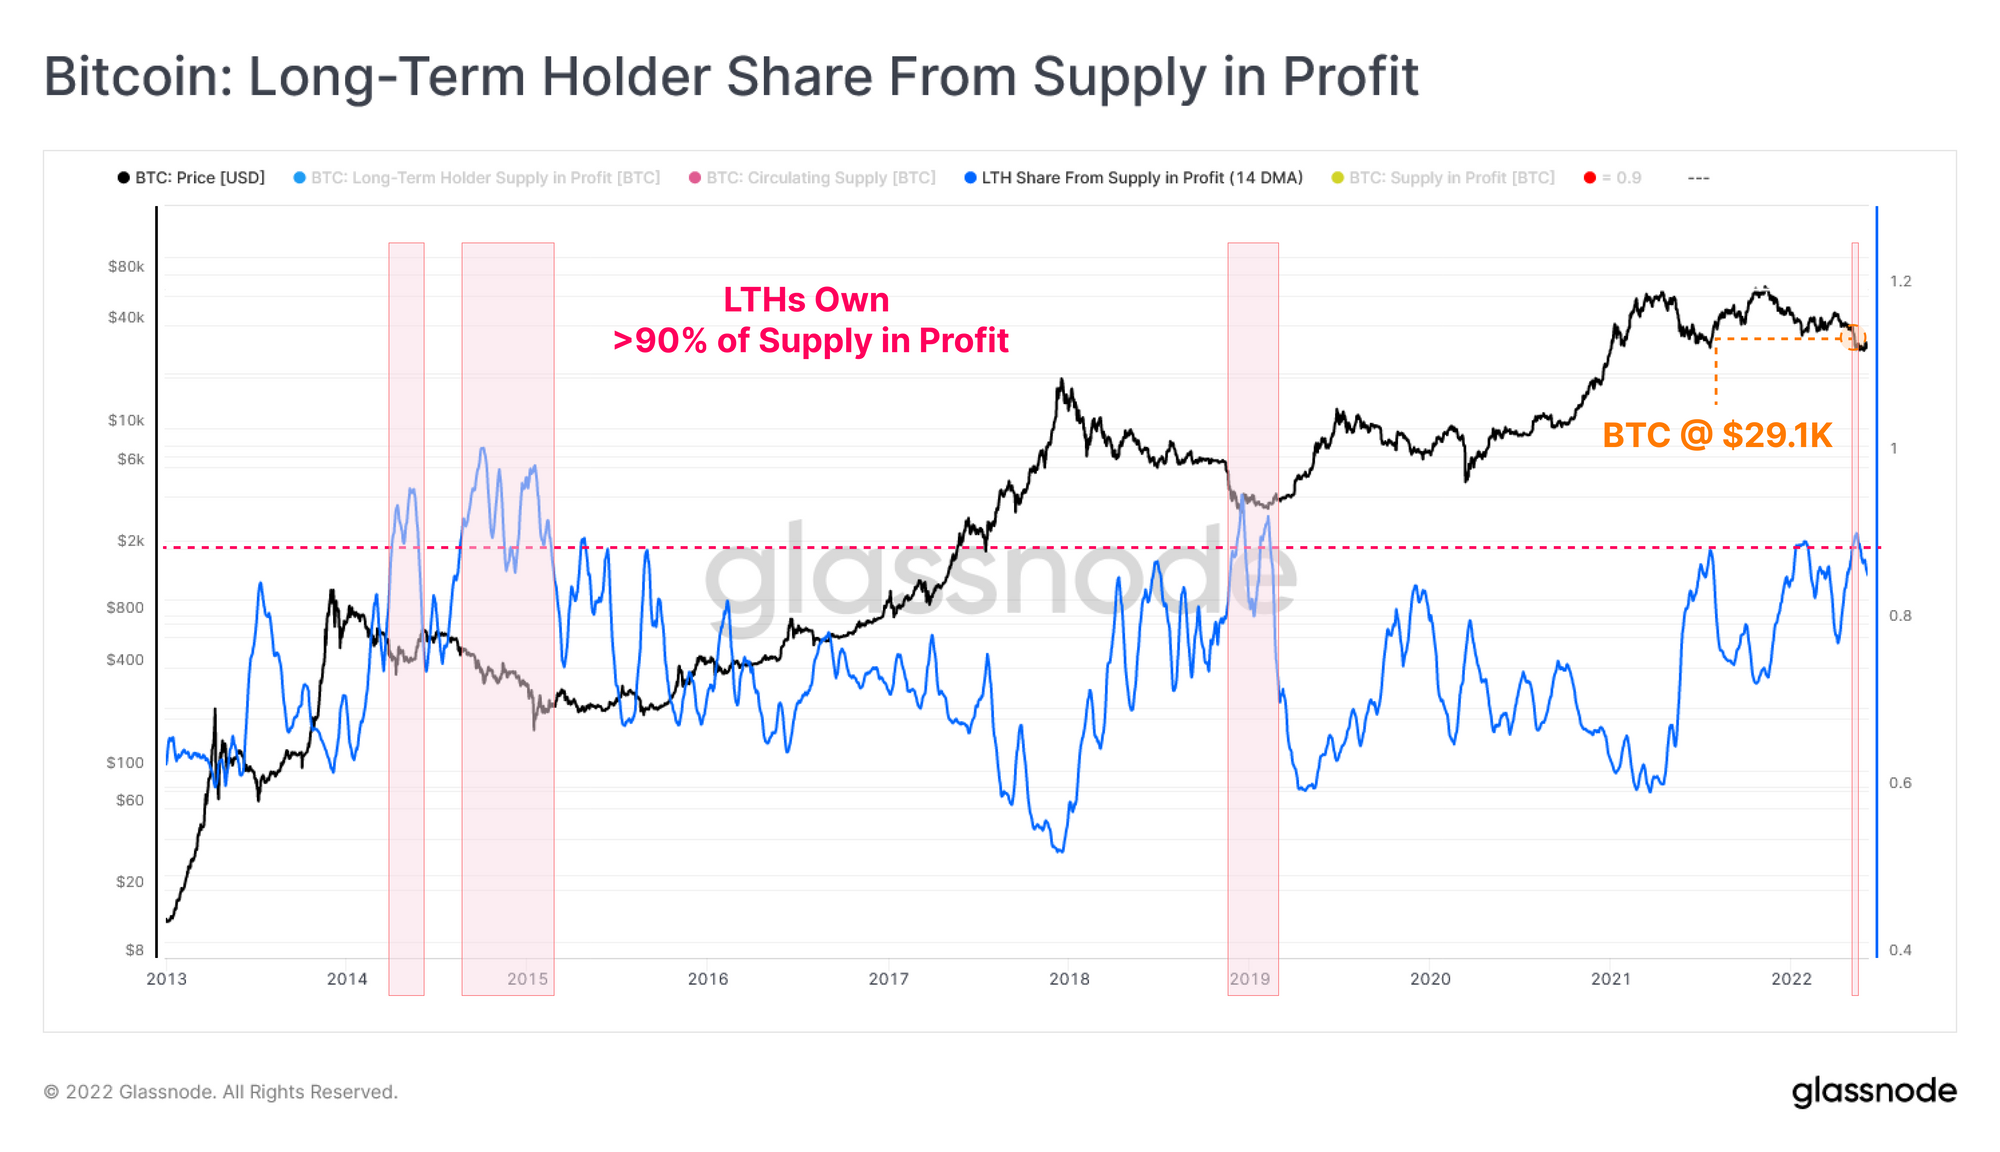 Bitcoin: Long-term Holder Share From Supply in Profit